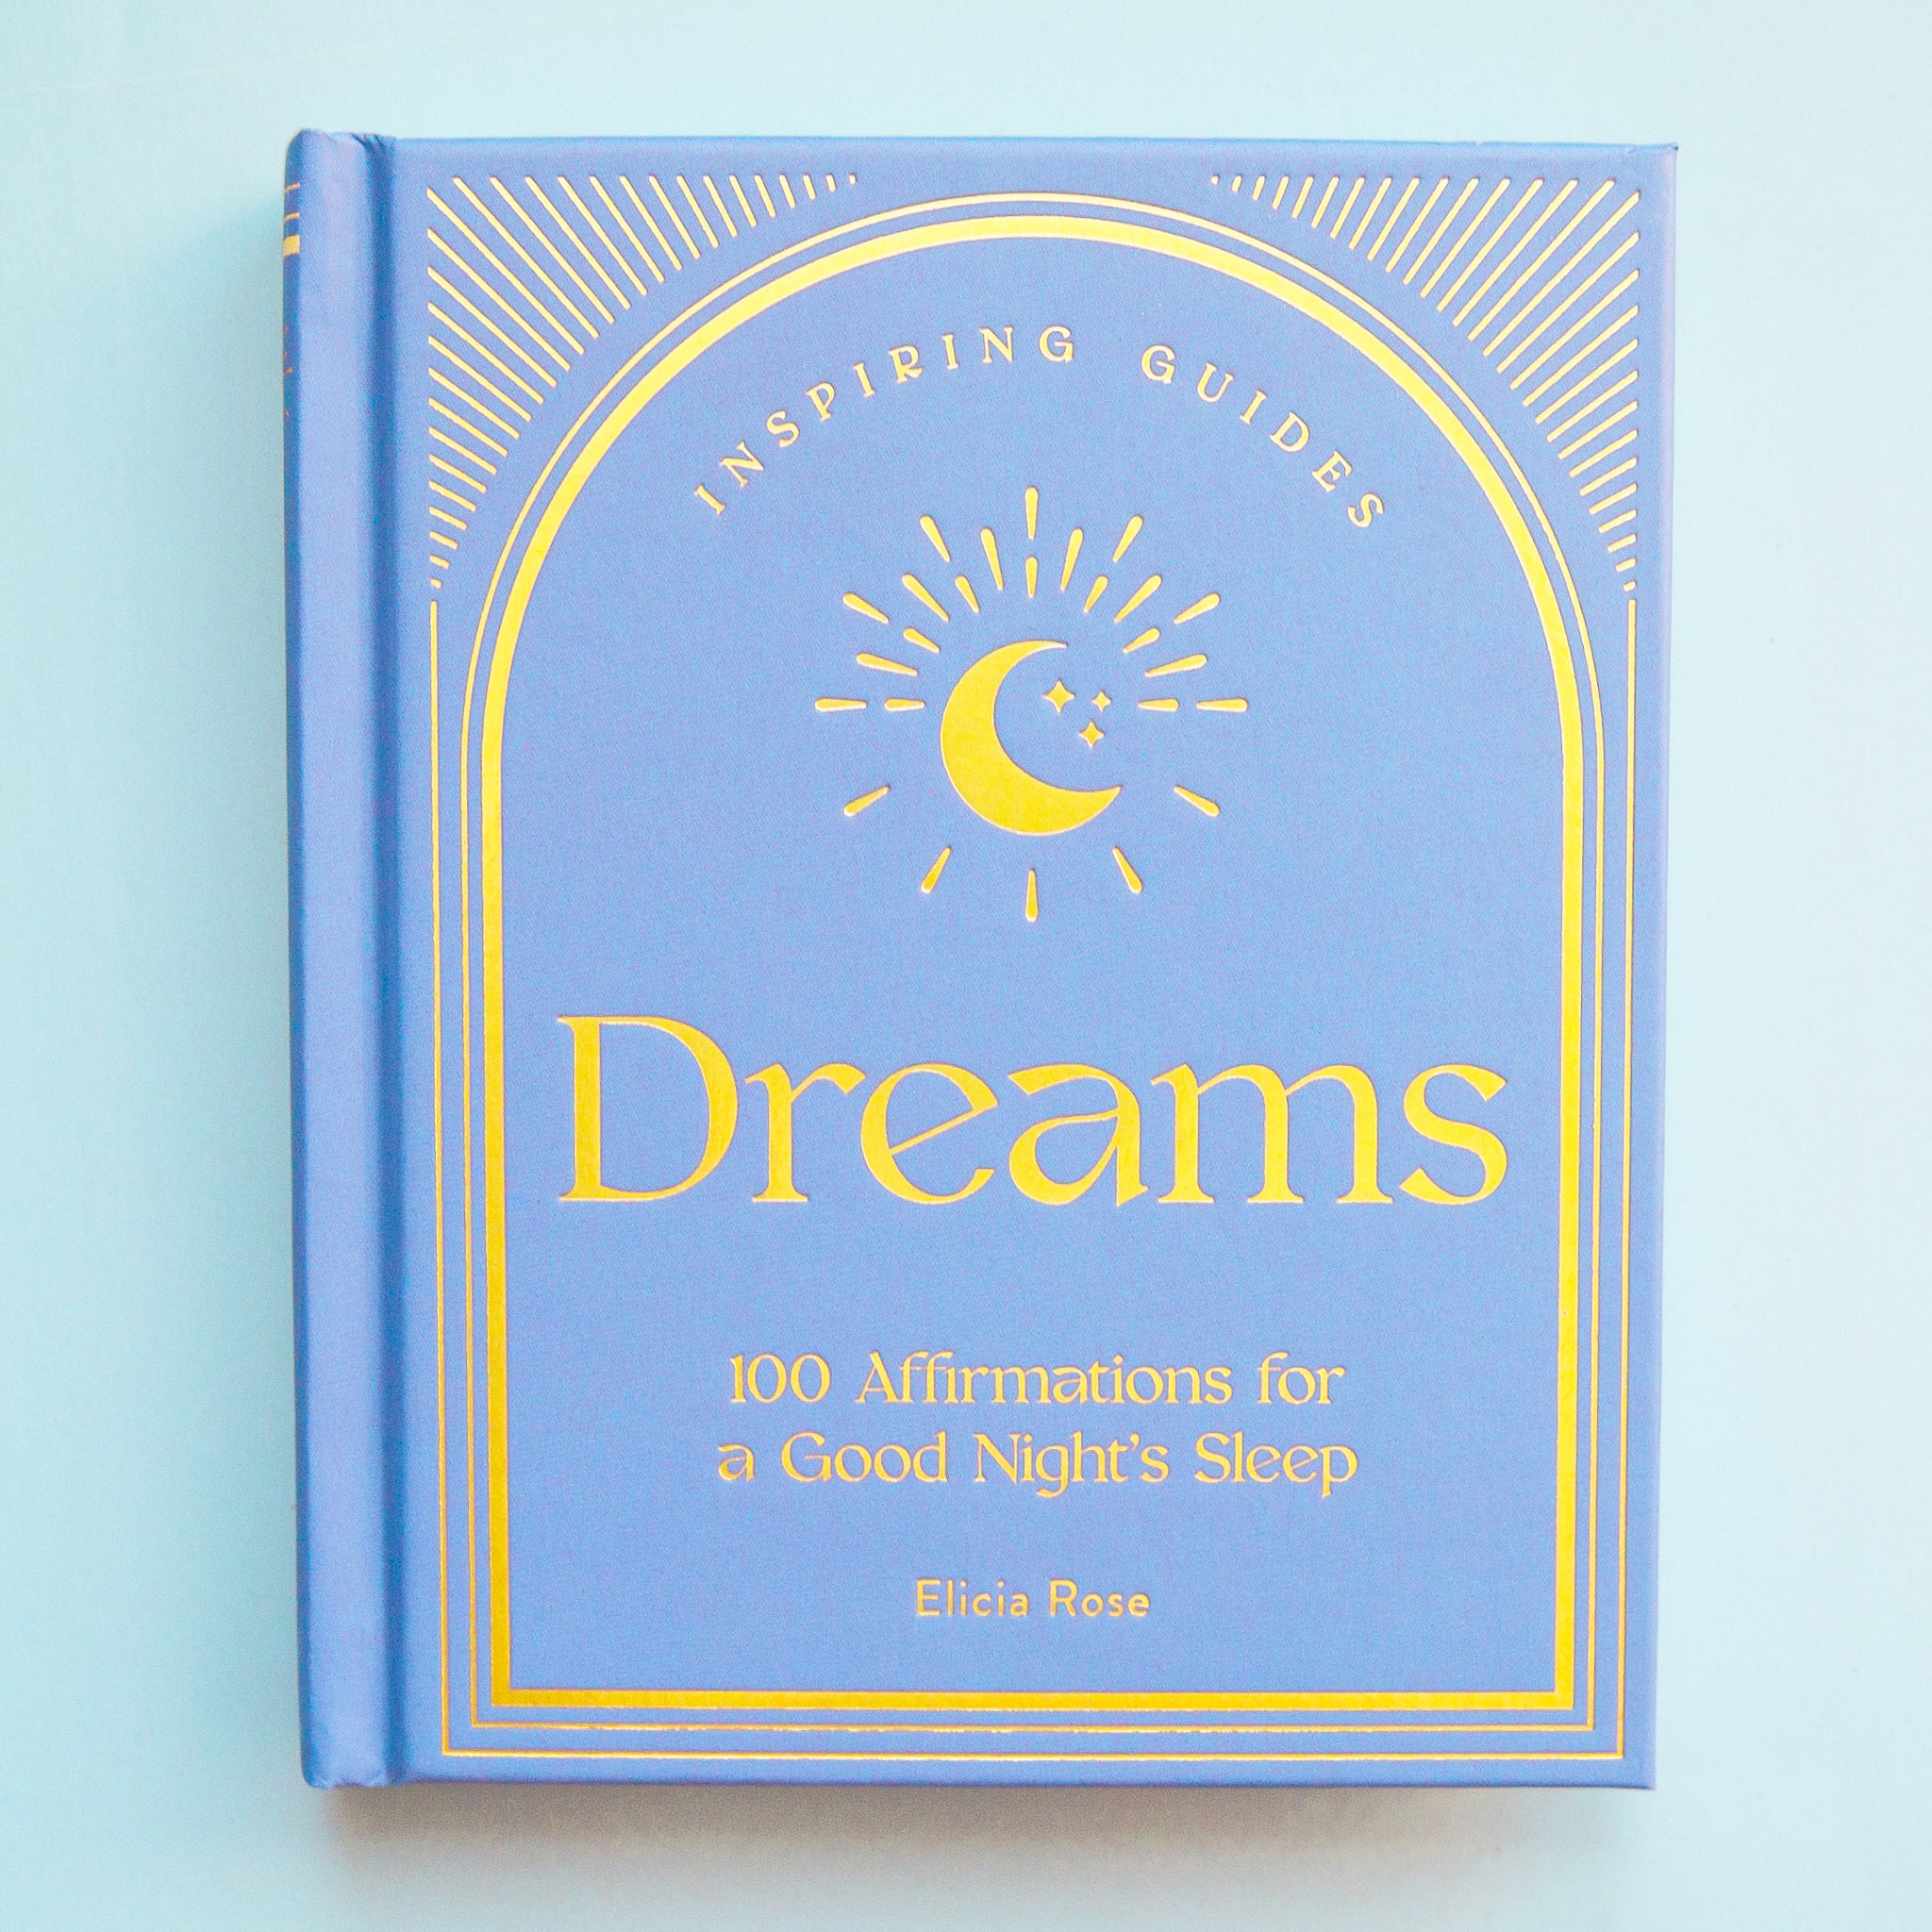 On a blue background is a blue book with god text and moon design on the cover that reads, "Inspiring Guides Dreams 100 Affirmations for a Good Night's Sleep". 